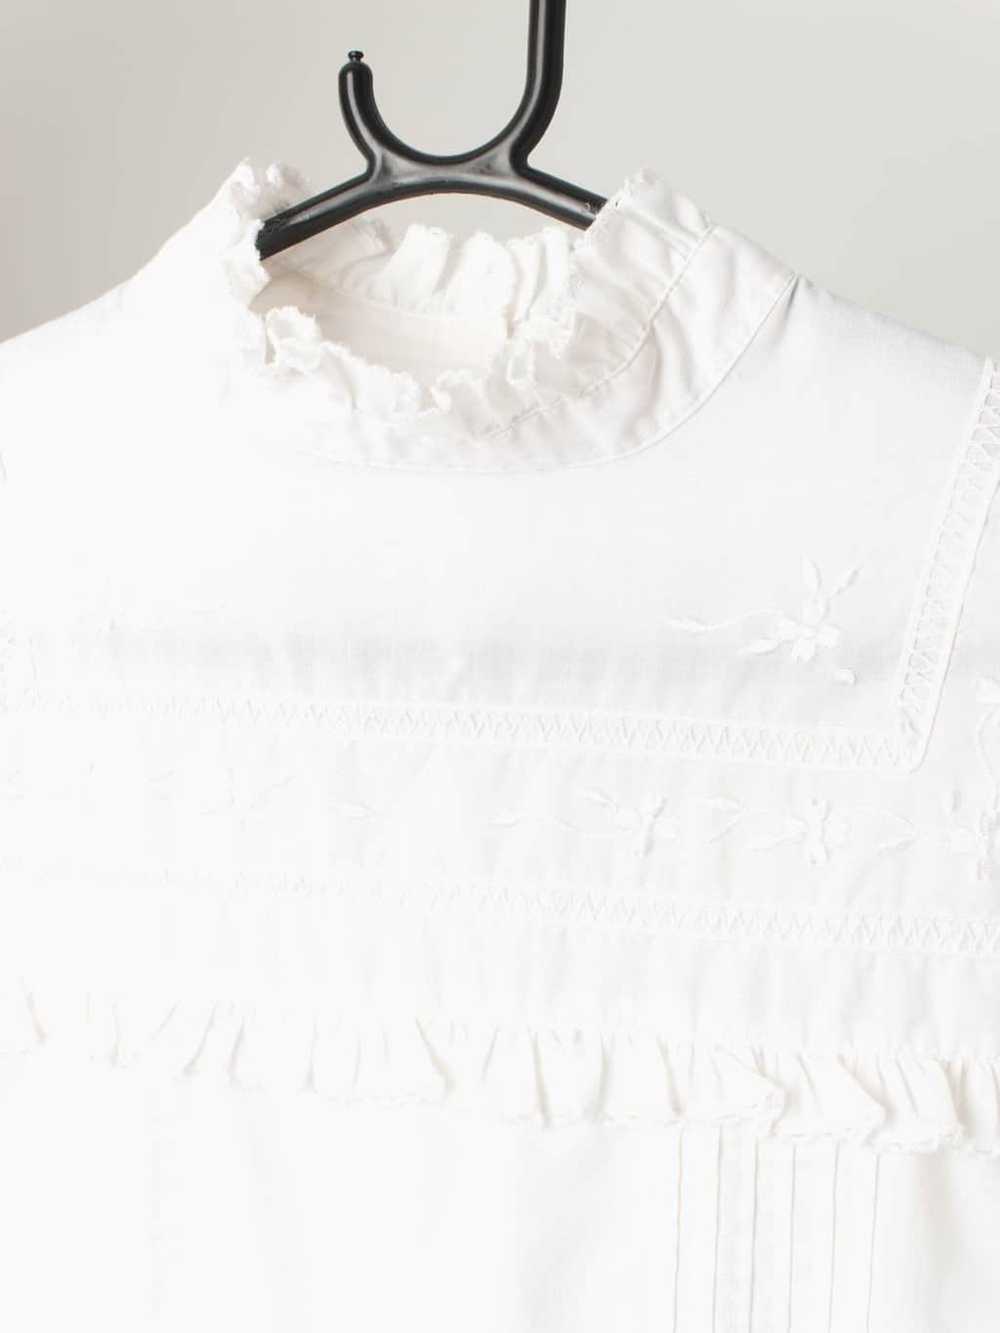 Vintage 70s blouse white with frills / ruffles an… - image 3